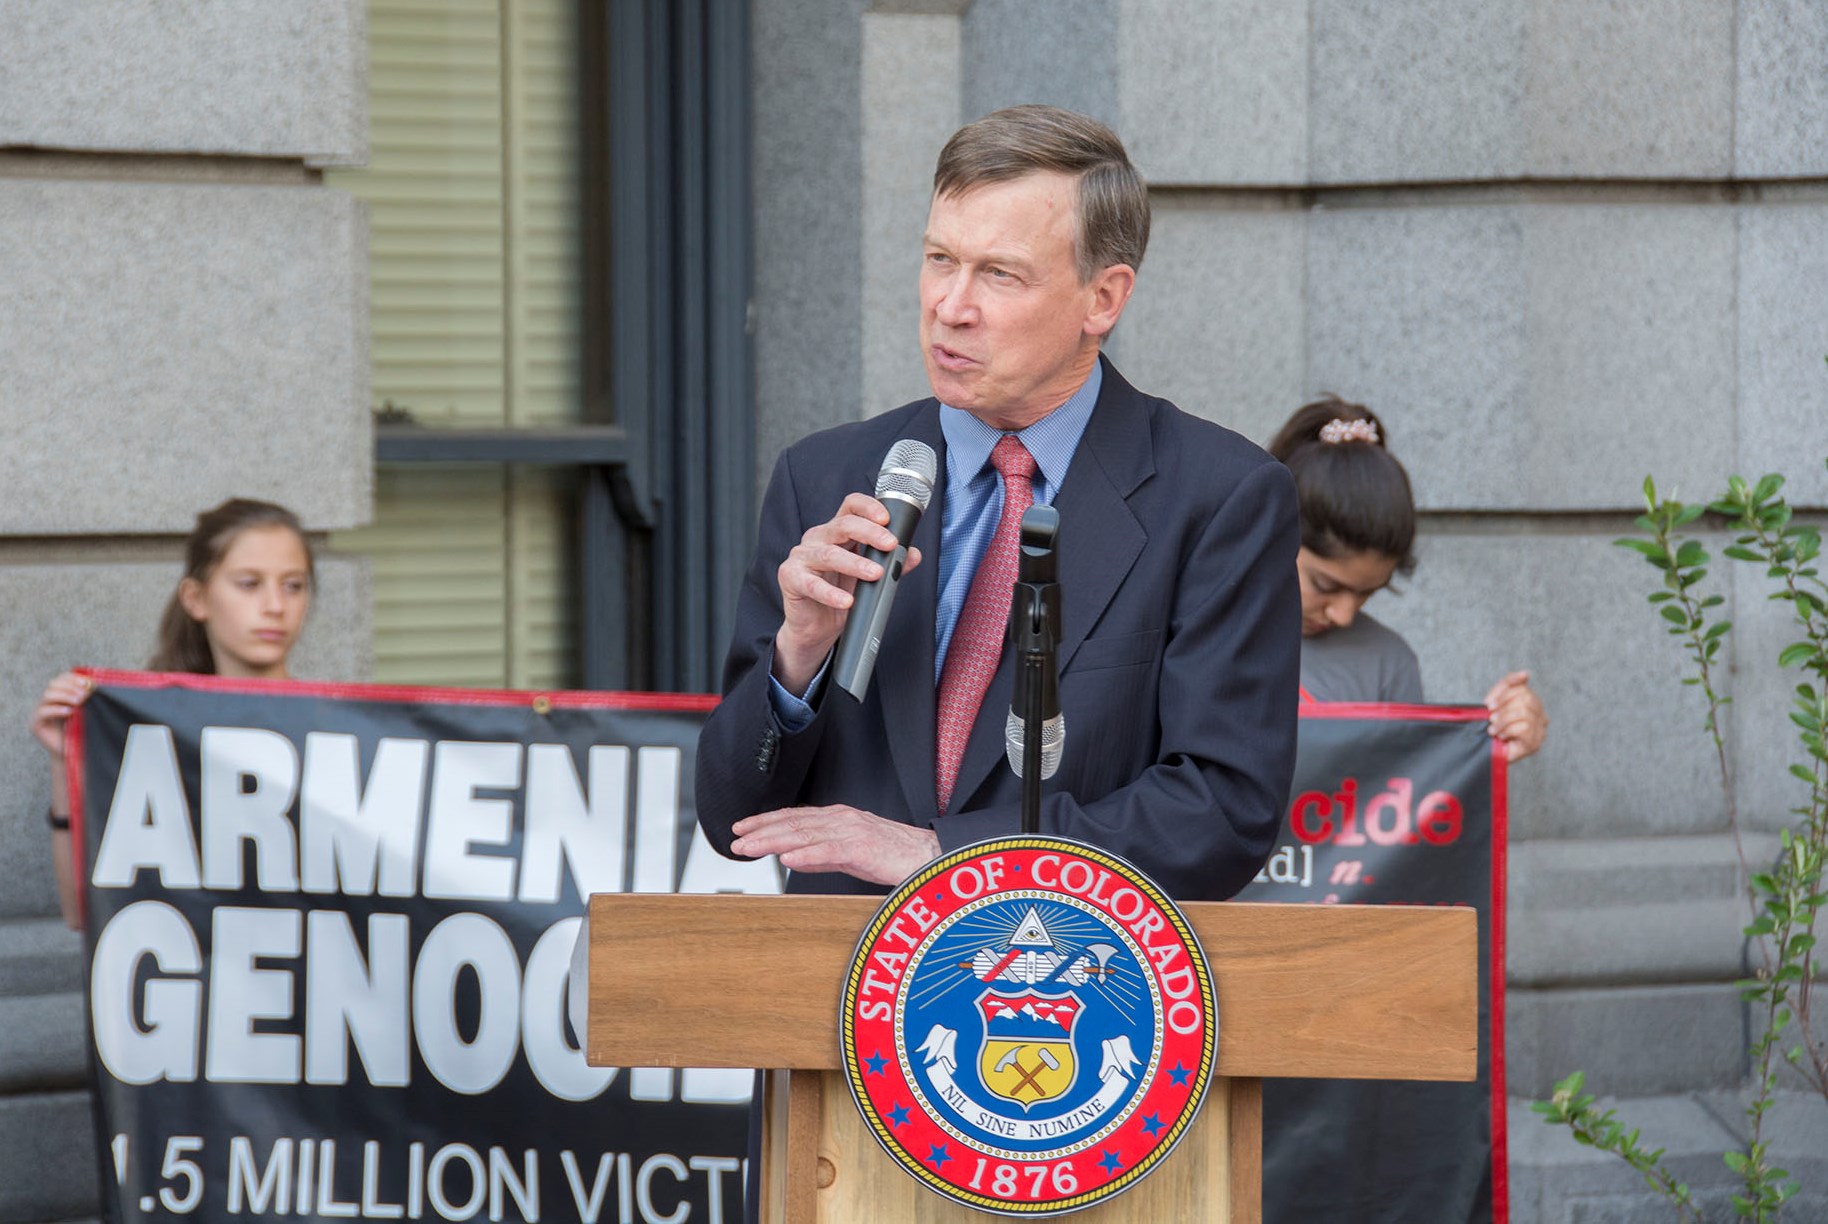 Governor Hickenlooper – Photo by Kevo Hedeshian